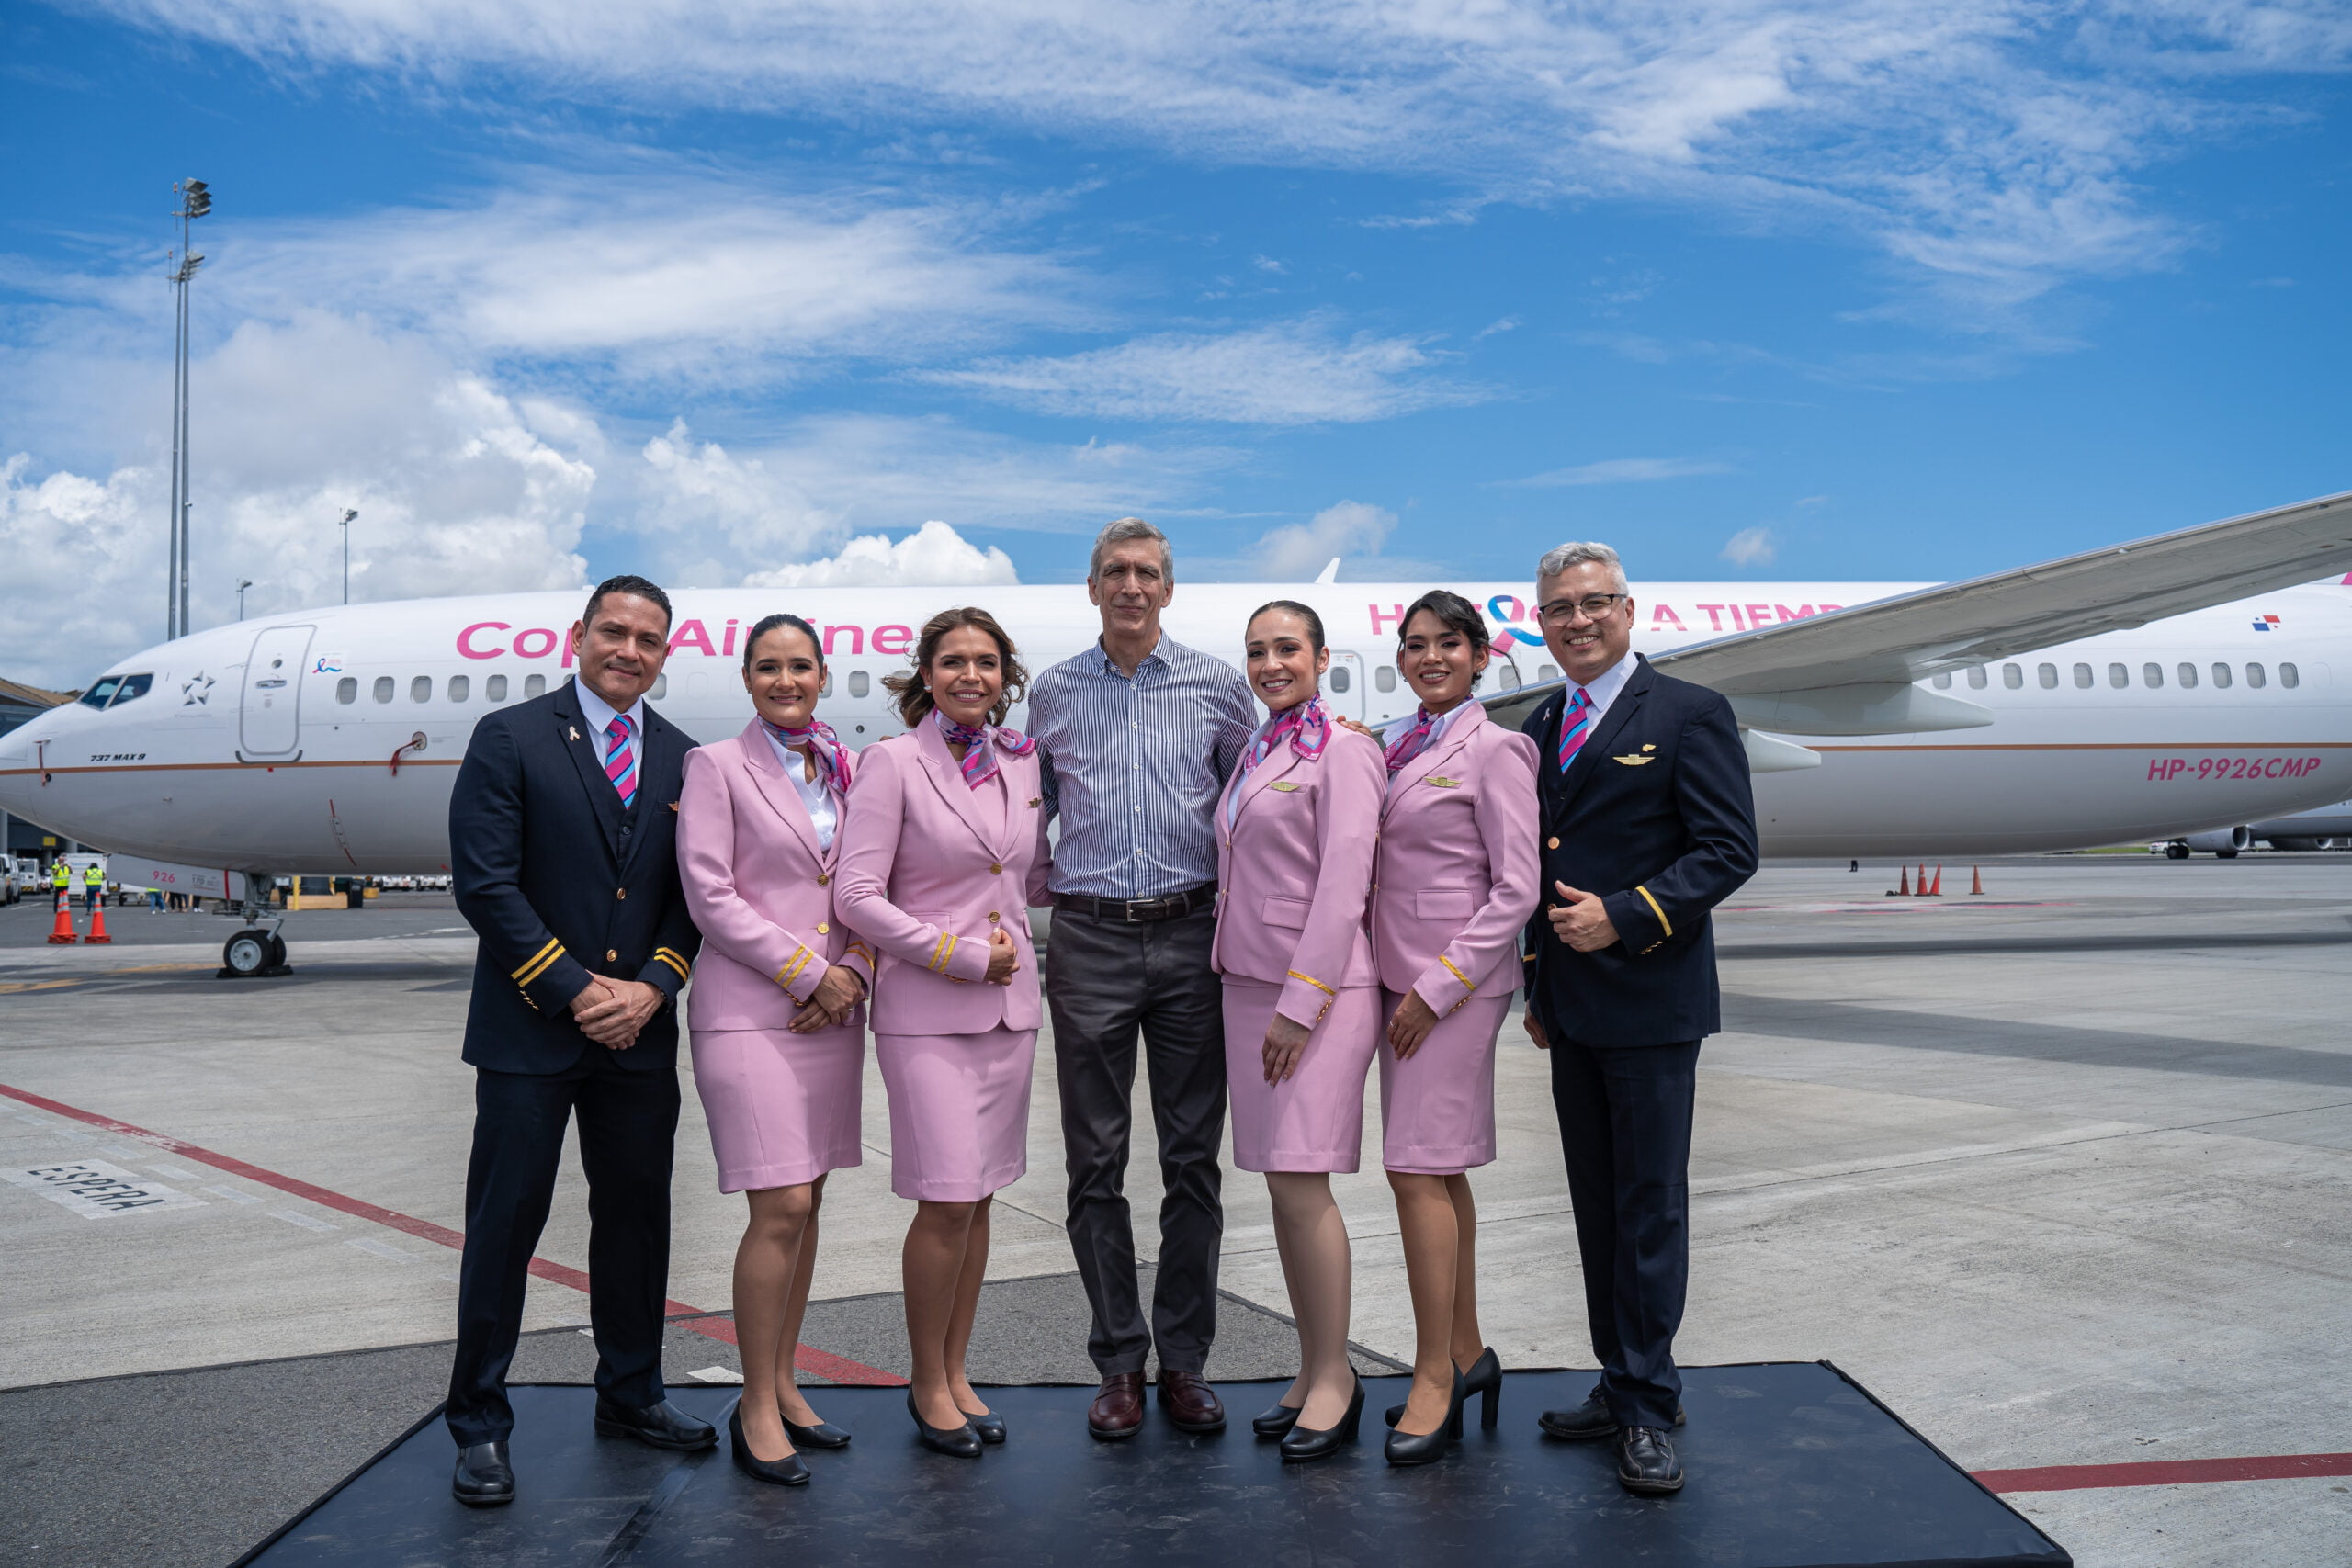 Copa Airlines unveils new aircraft featuring the “Get Tested Early” breast cancer awareness campaign message